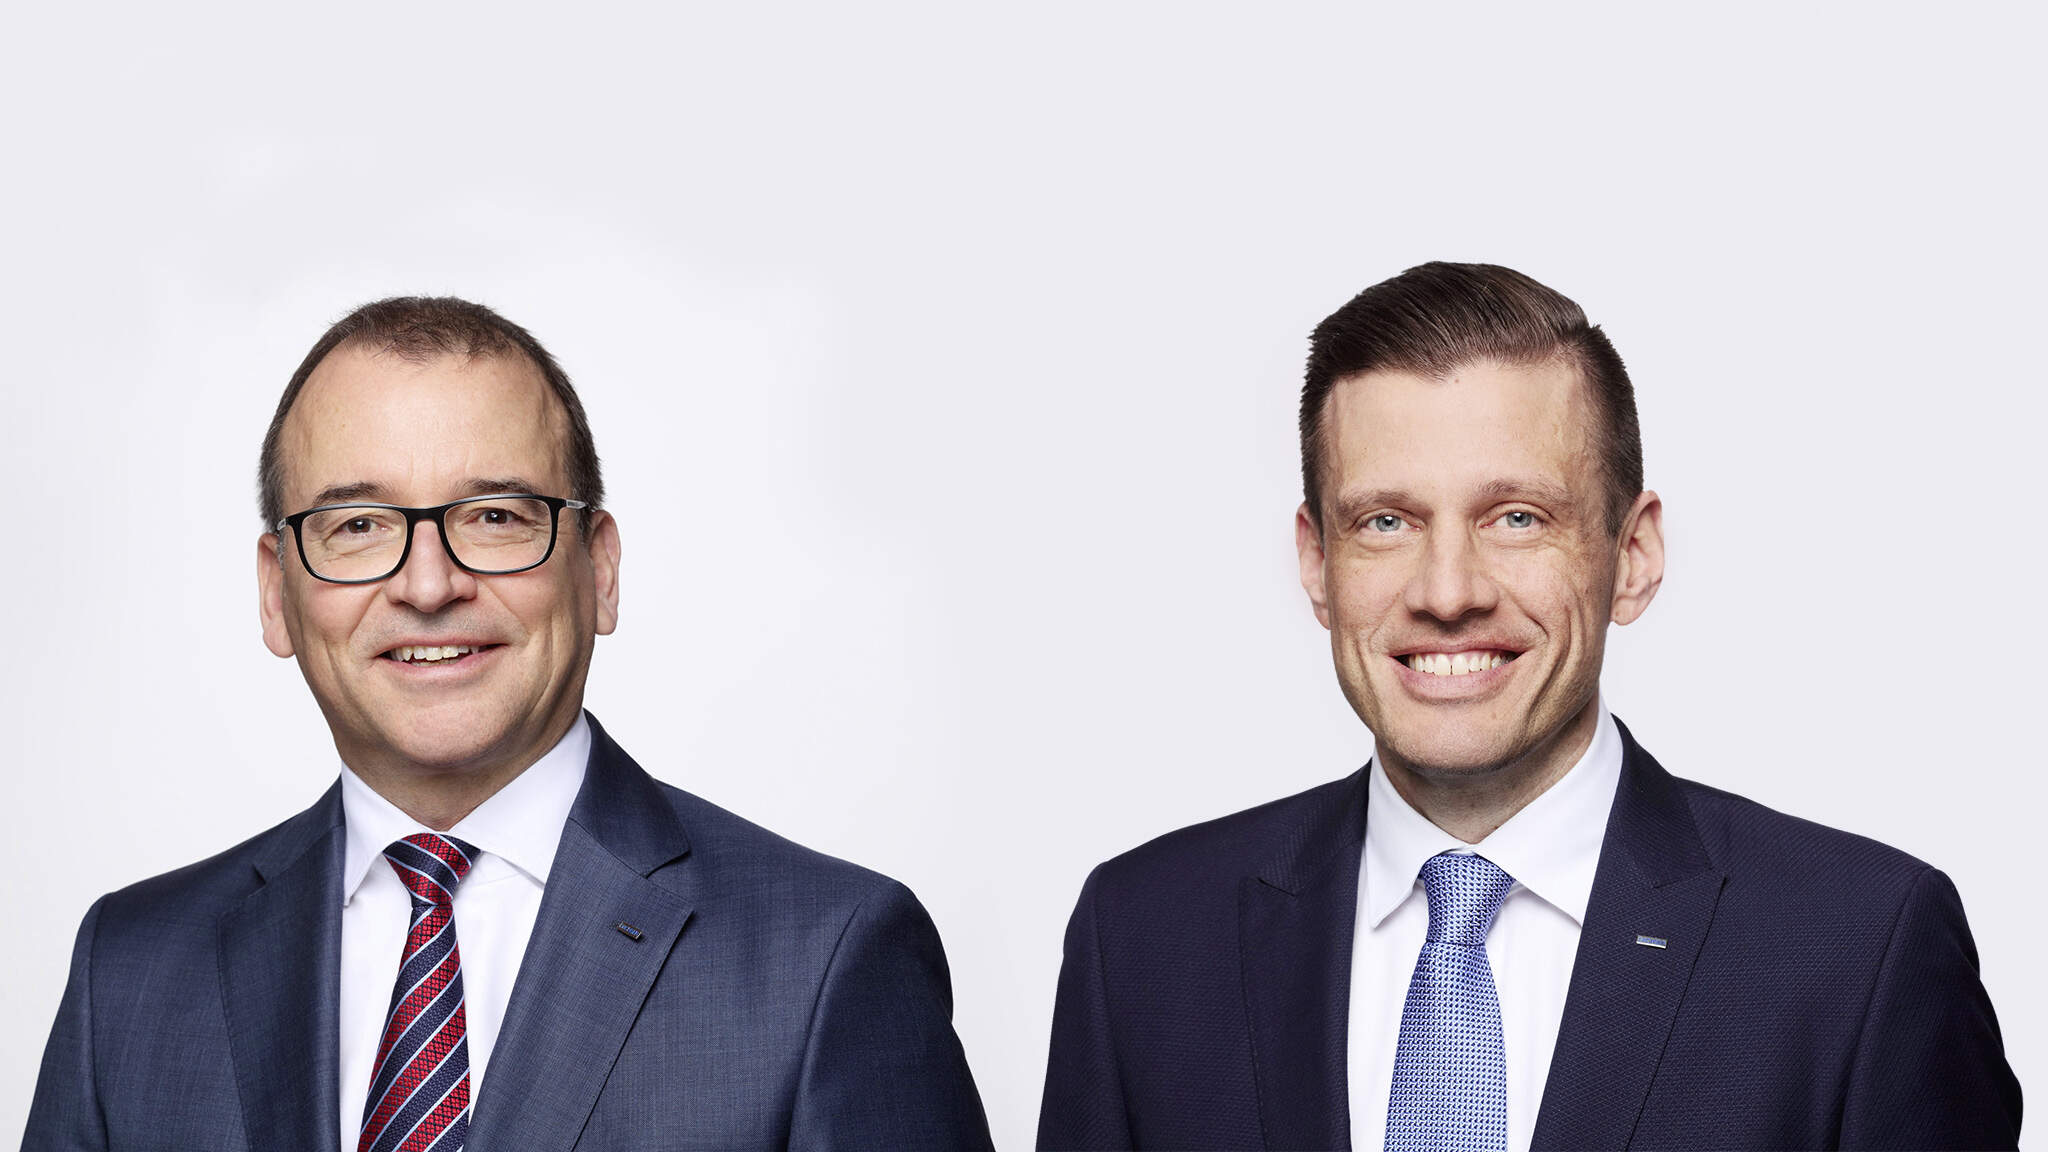 Alfred Miller, Managing Director at DACHSER Food Logistics (left) und Alexander Tonn, Chief Operations Officer (COO) Road Logistics at DACHSER (right).